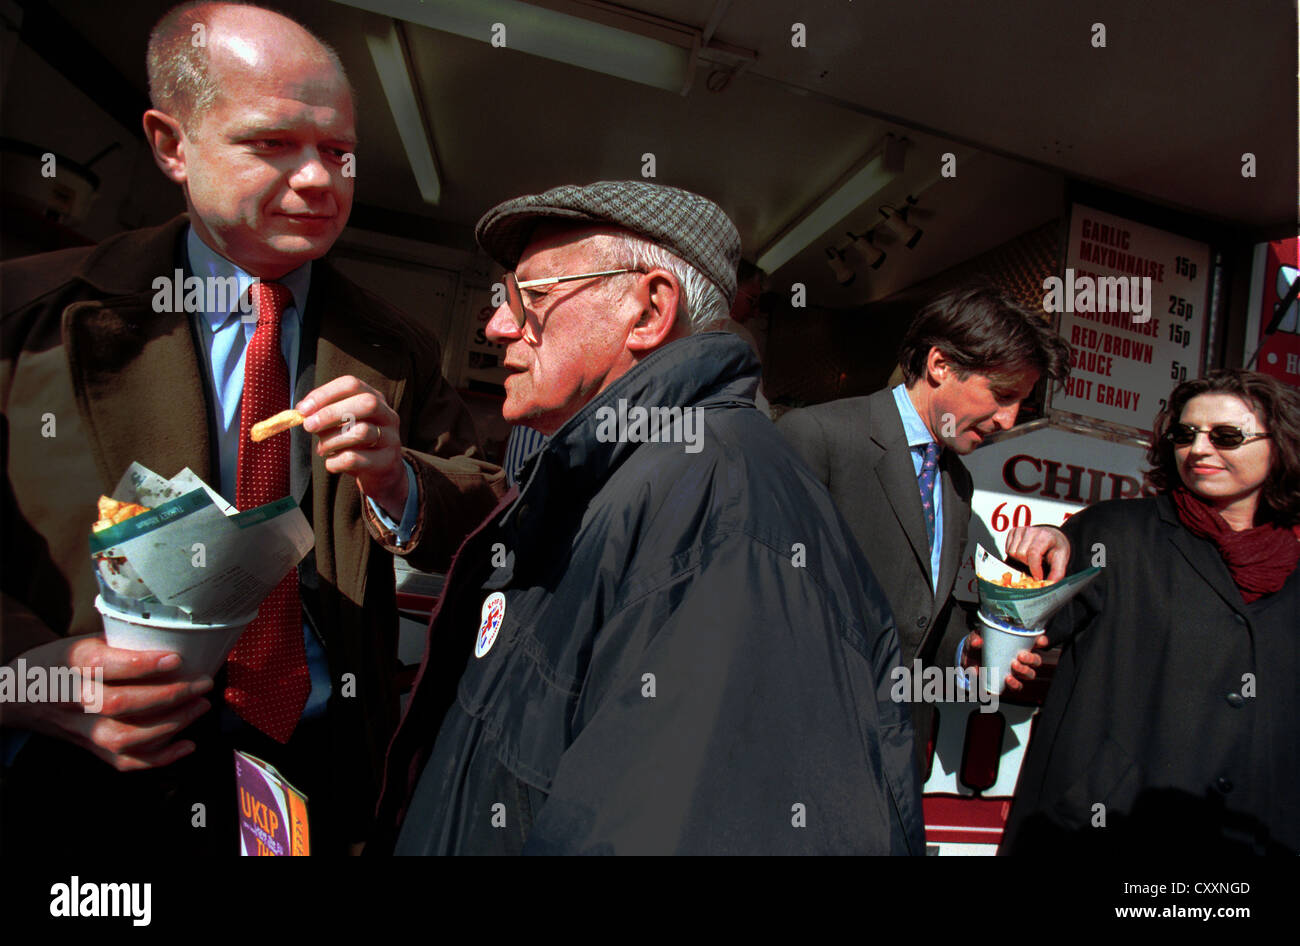 PHOTOGRAPH BY BRIAN HARRIS-COPYRIGHT-14/MARCH/2001 WILLIAM HAGUE, CONSERVATIVE PARTY LEADER IN GREAT BRITAIN CAMPAIGNING Stock Photo